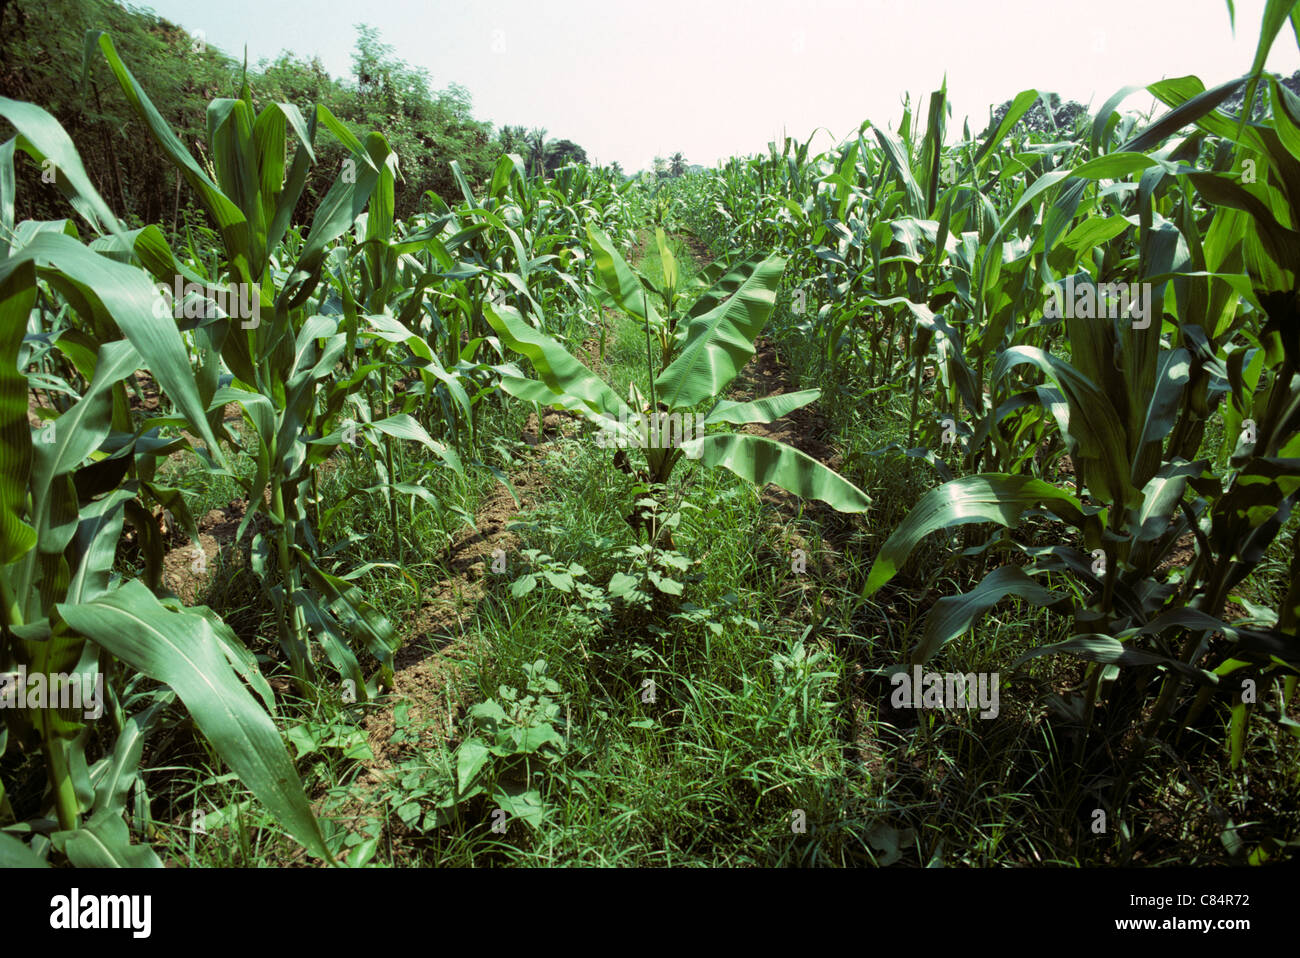 Maize crop with banana plants cropped between the rows, Thailand Stock Photo